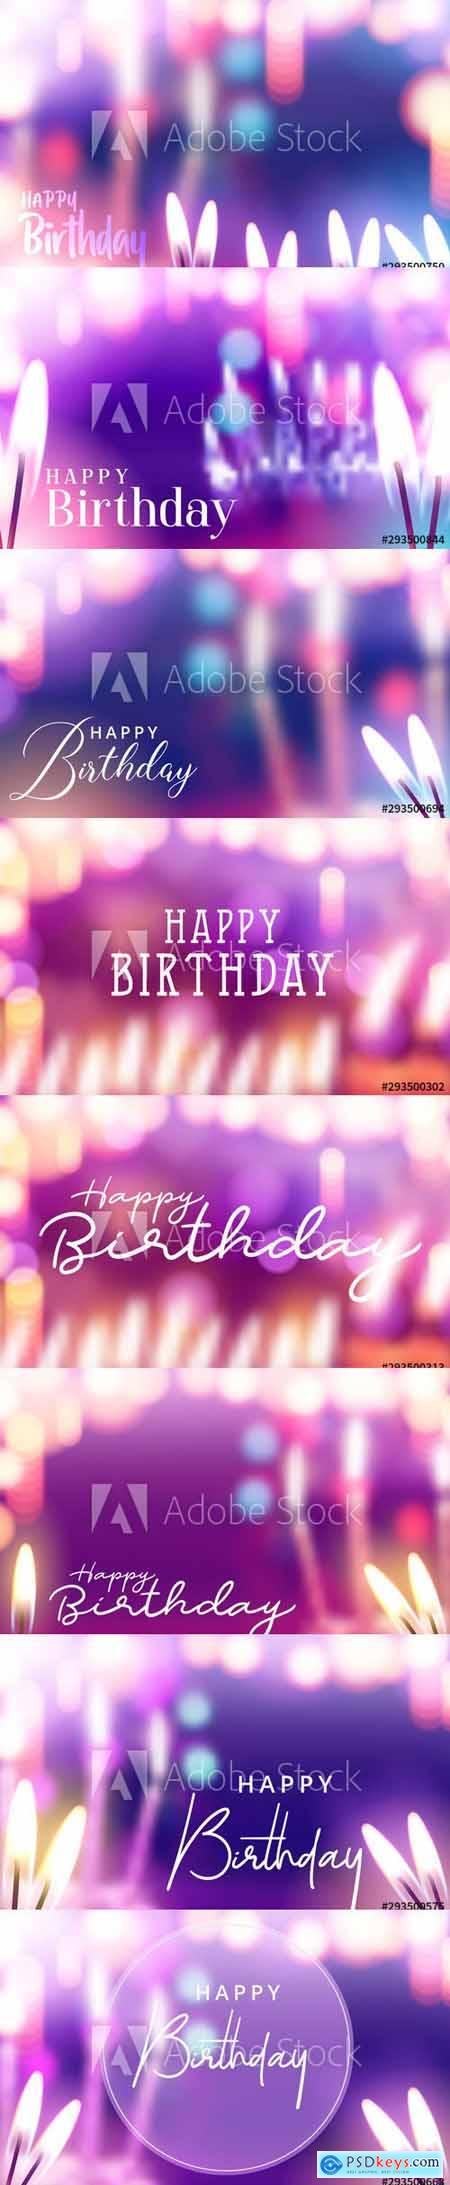 Vector Set - Birthday Design with Candle Lights Illustrations